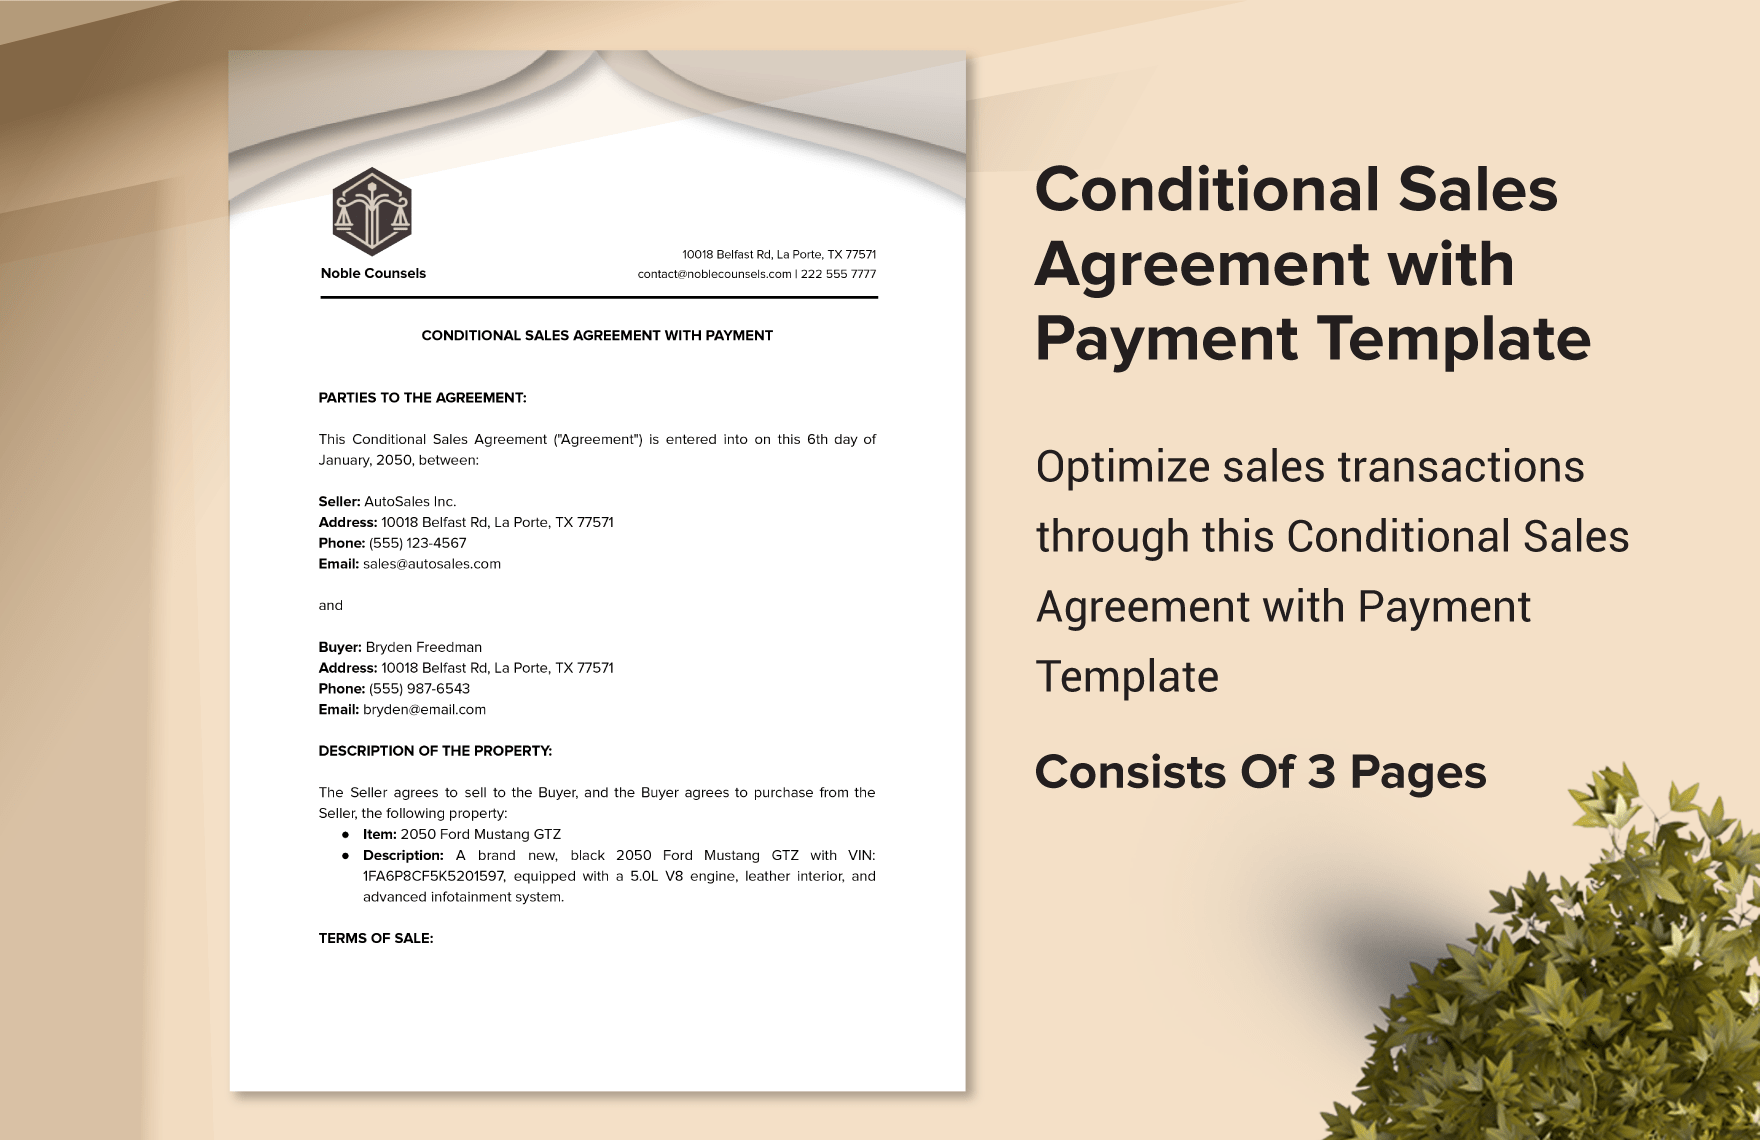 Conditional Sales Agreement with Payment Template